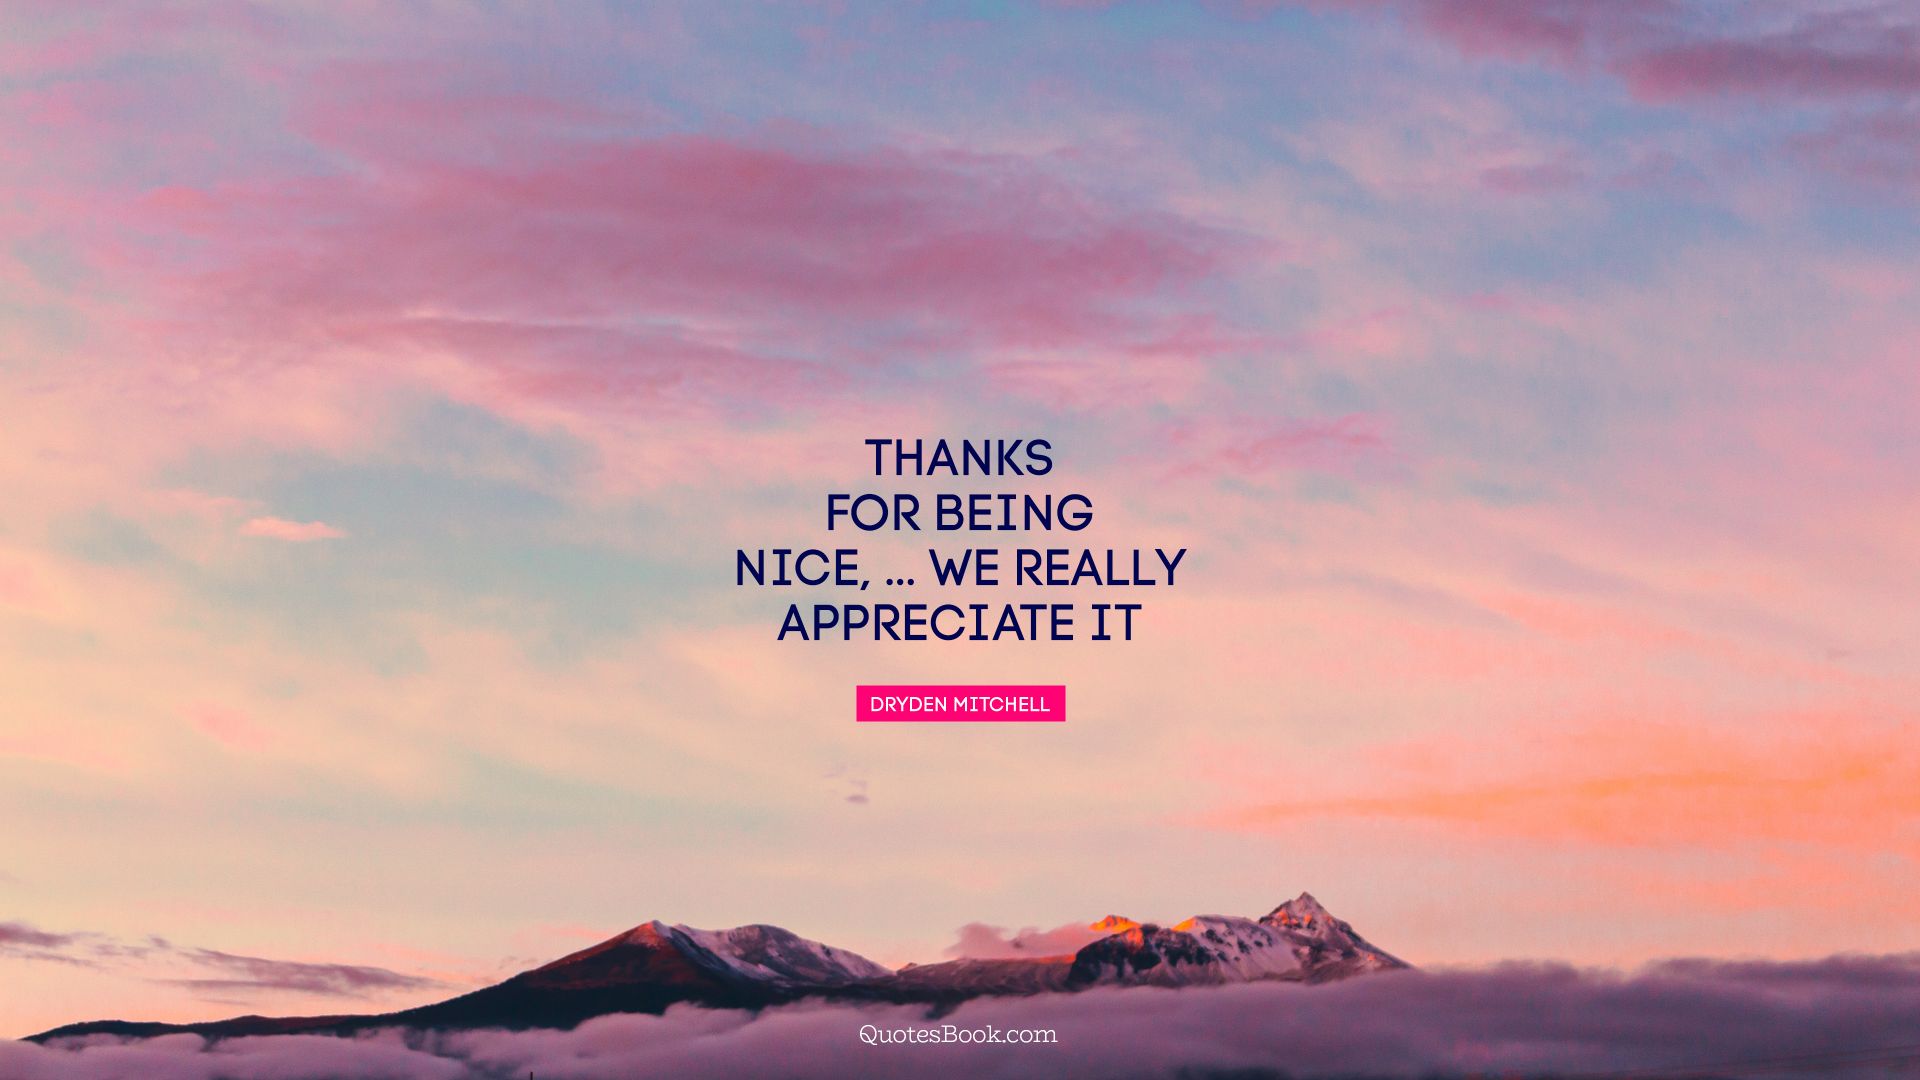 Thanks for being nice, ... We really appreciate it. - Quote by Dryden Mitchell